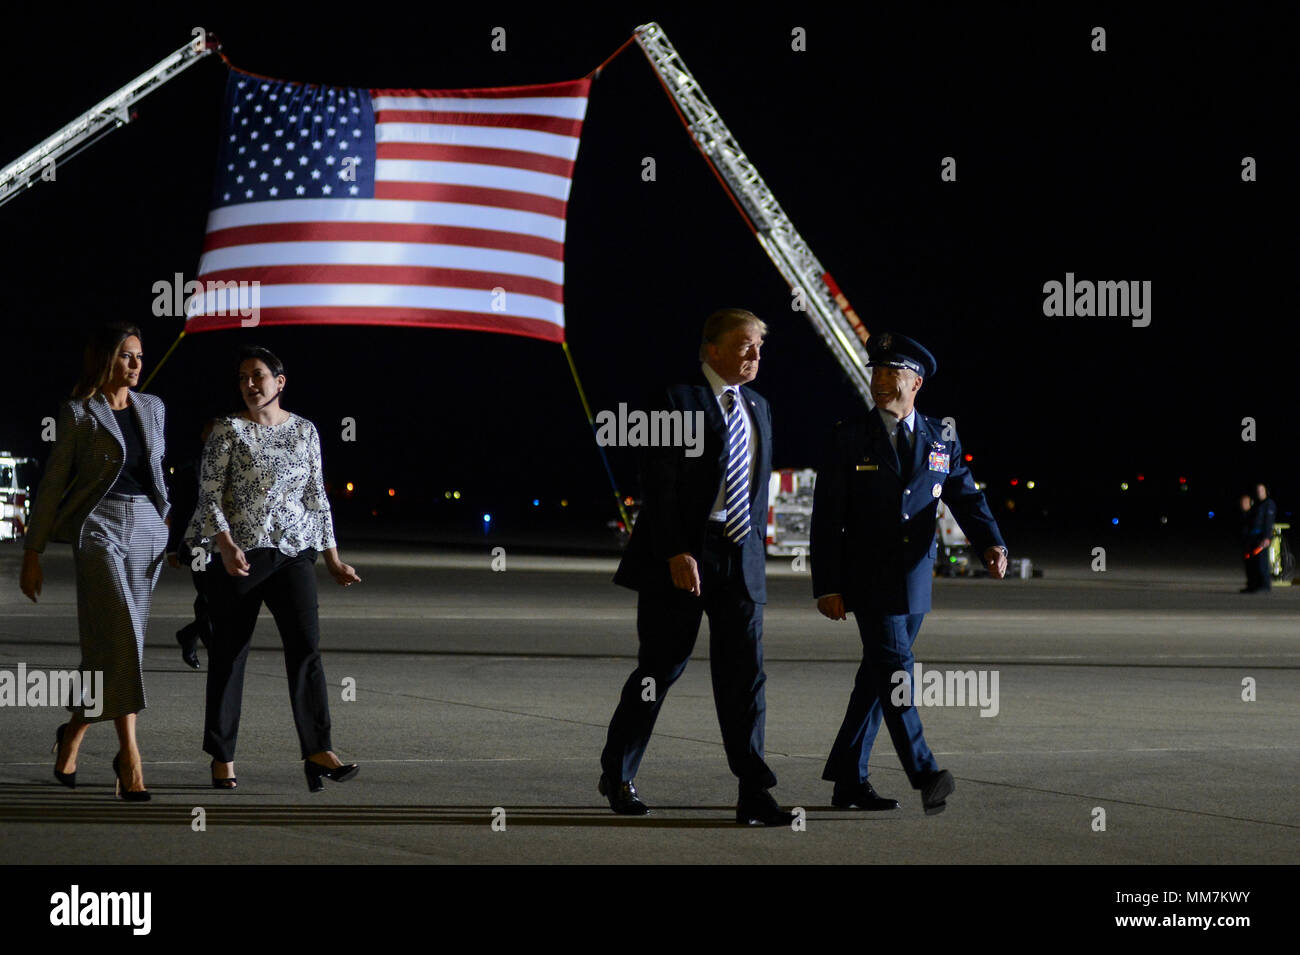 U.S. President Donald Trump and First Lady Melania Trump walk with Col. Casey D. Eaton, 89th Airlift Wing commander and his wife Lisa Eaton as they arrive to welcome home three American detainees freed by North Korea at Joint Base Andrews May 10, 2018 in Clinton, Maryland. The three include Kim Dong-chul, Tony Kim and Kim Hak-song released as a gesture of goodwill ahead of the planned meeting between Trump and North Korean leader Kim Jong-un. Stock Photo